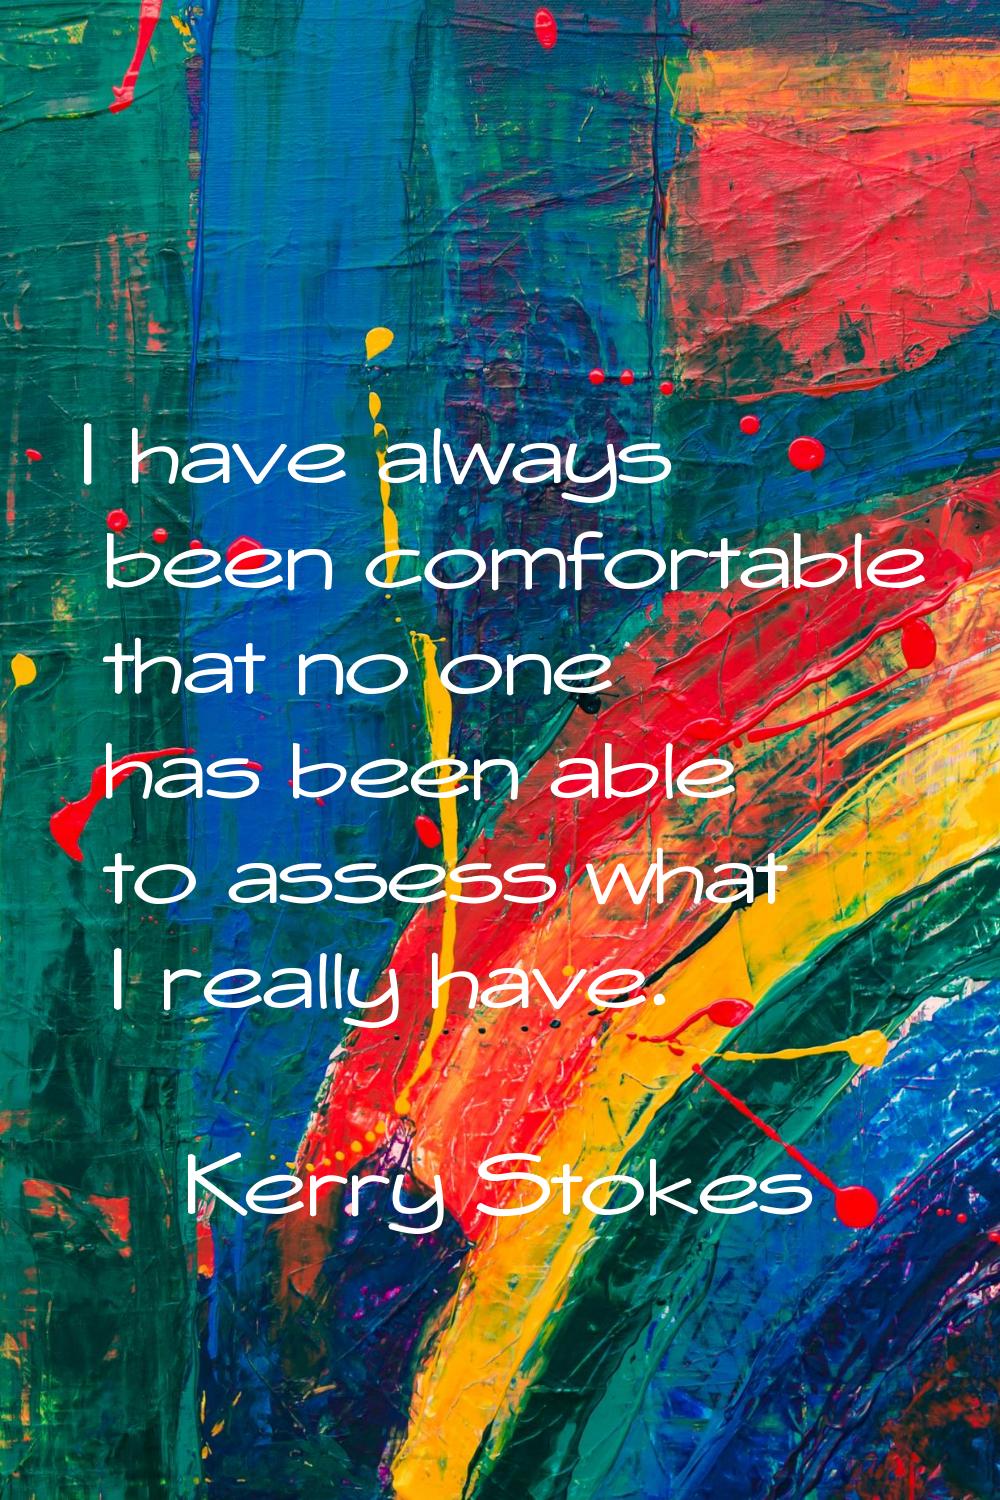 I have always been comfortable that no one has been able to assess what I really have.